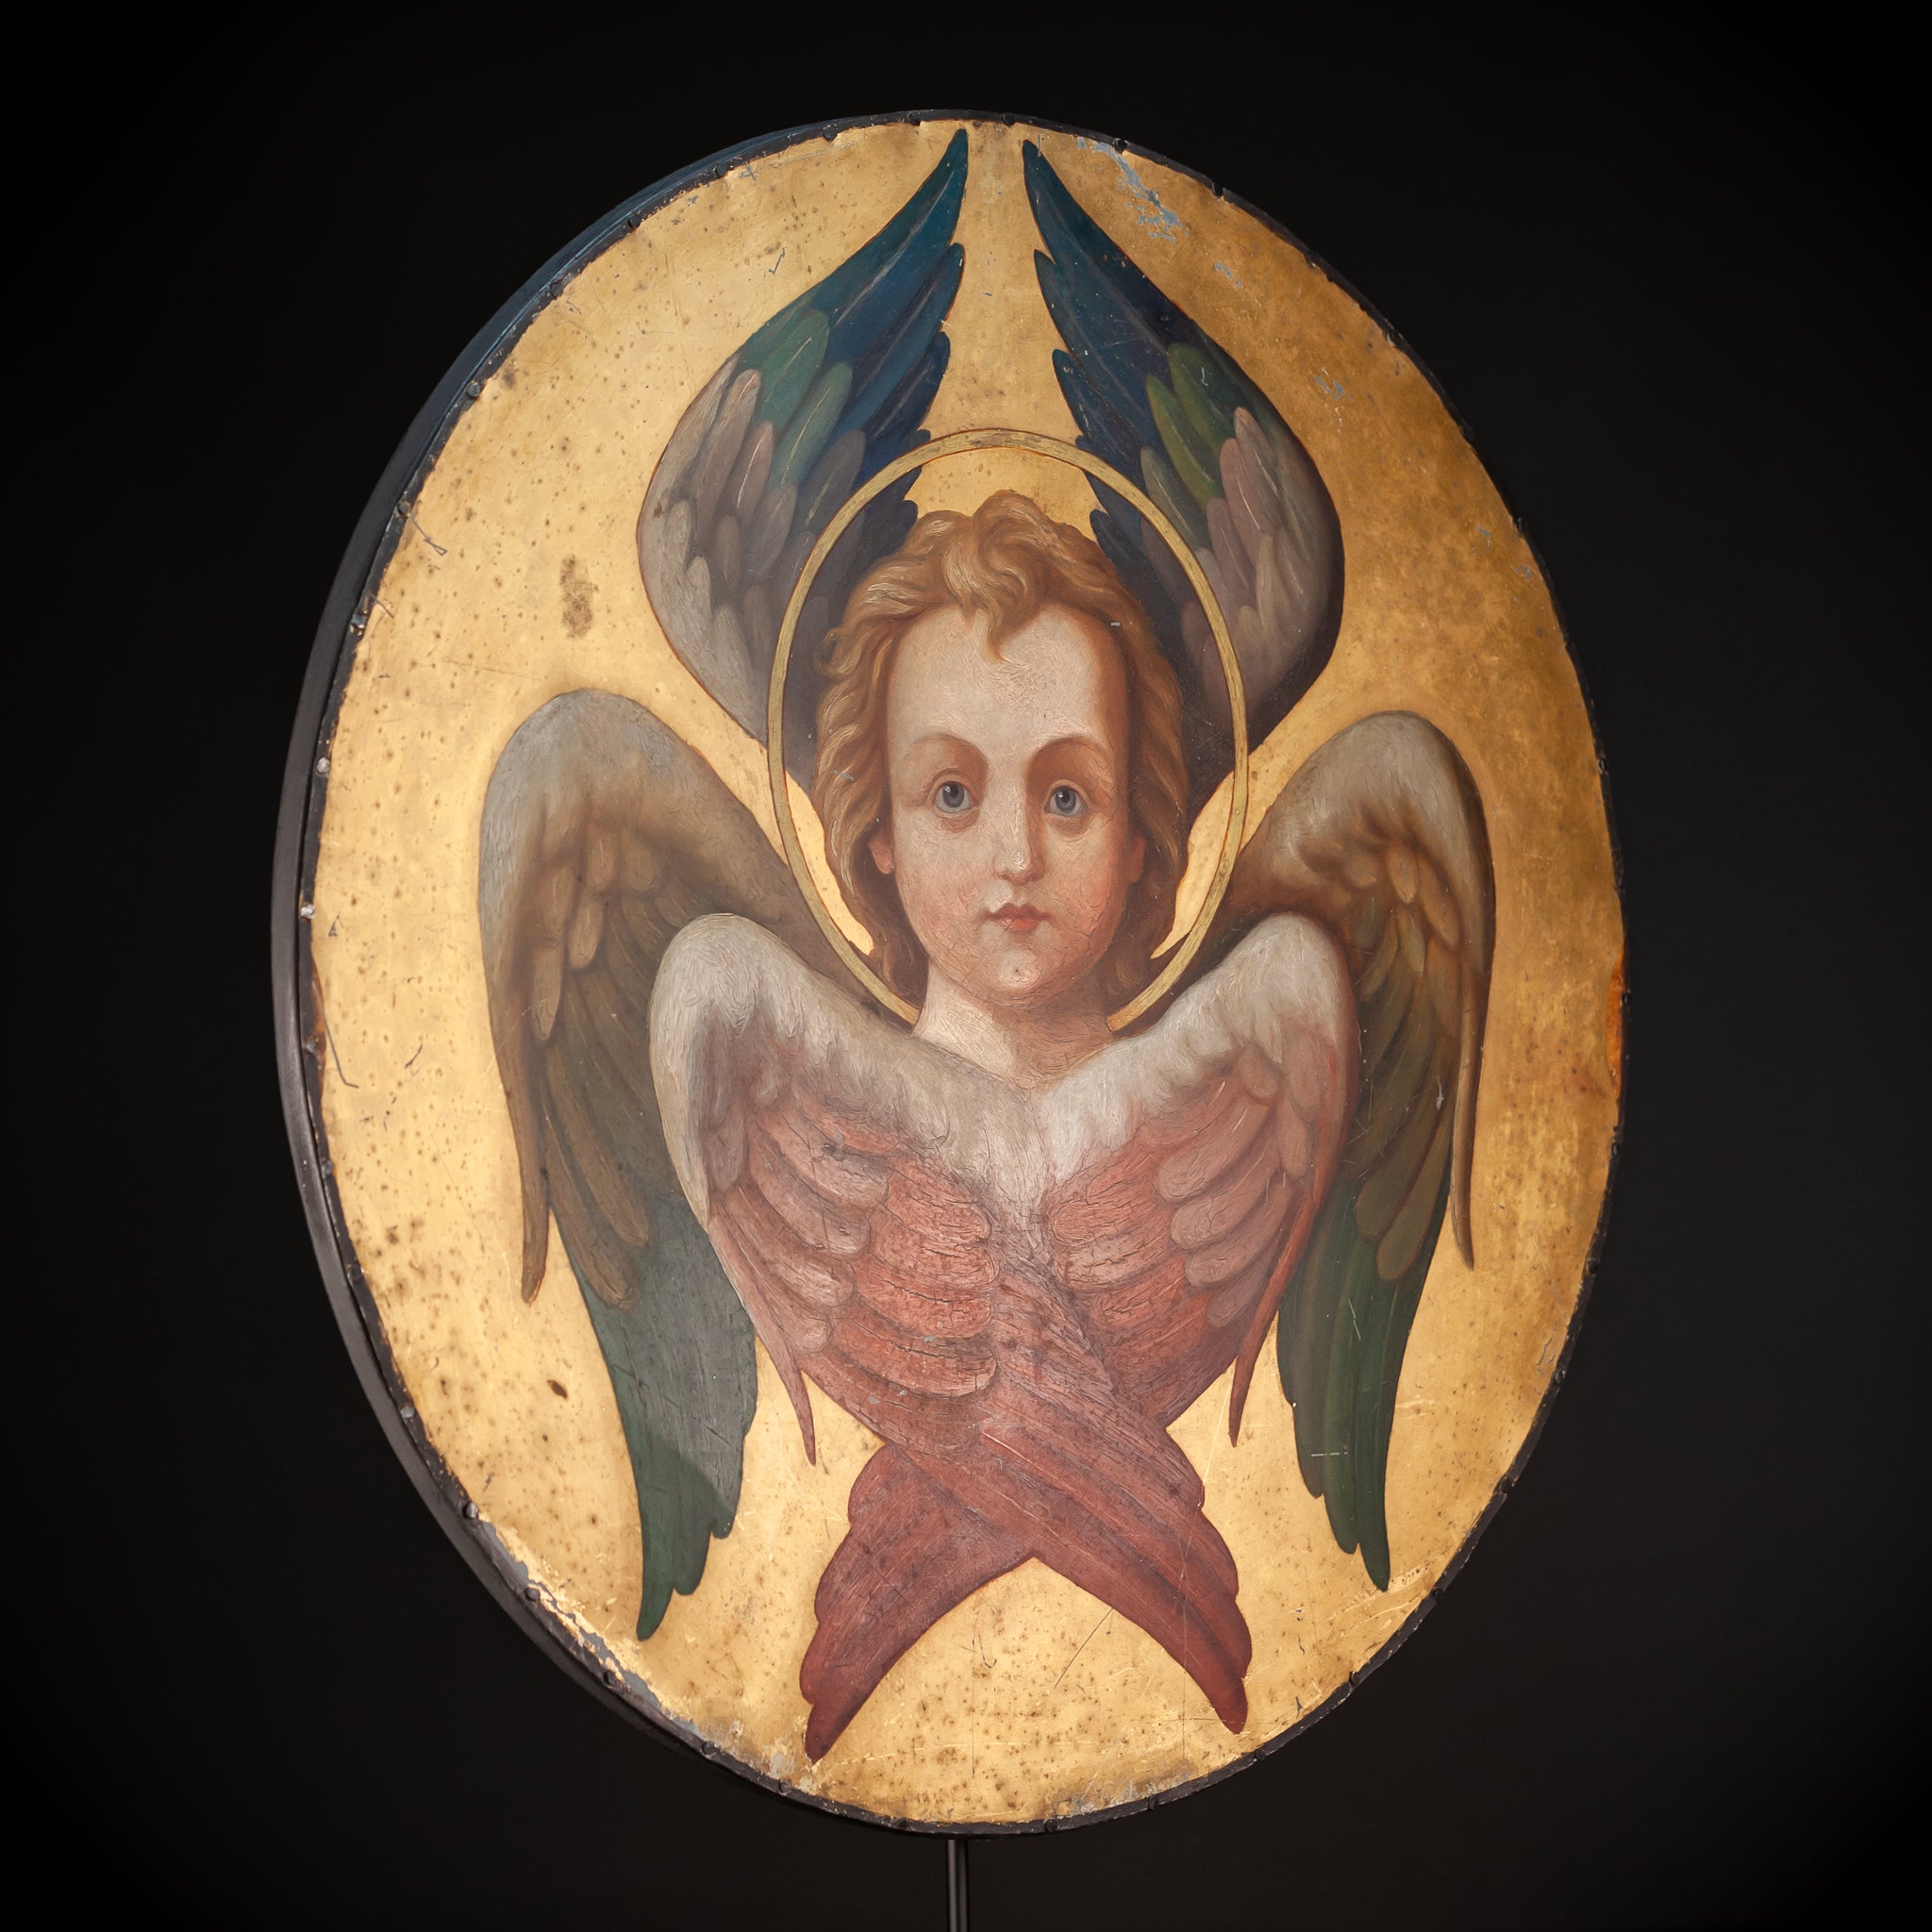 Angel Painting on Metal Sheet | 1800s Antique | 23.8" / 60.5 cm